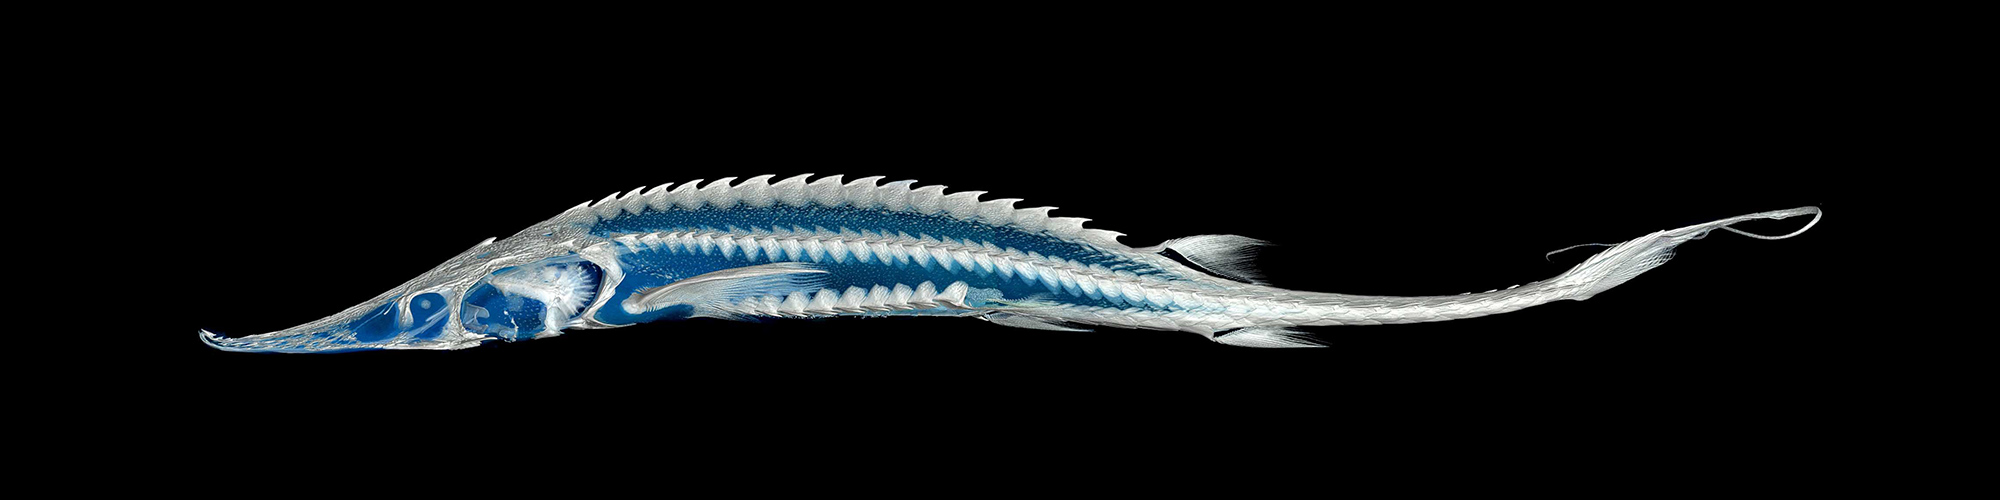 CT scan of a Shovelnose sturgeon